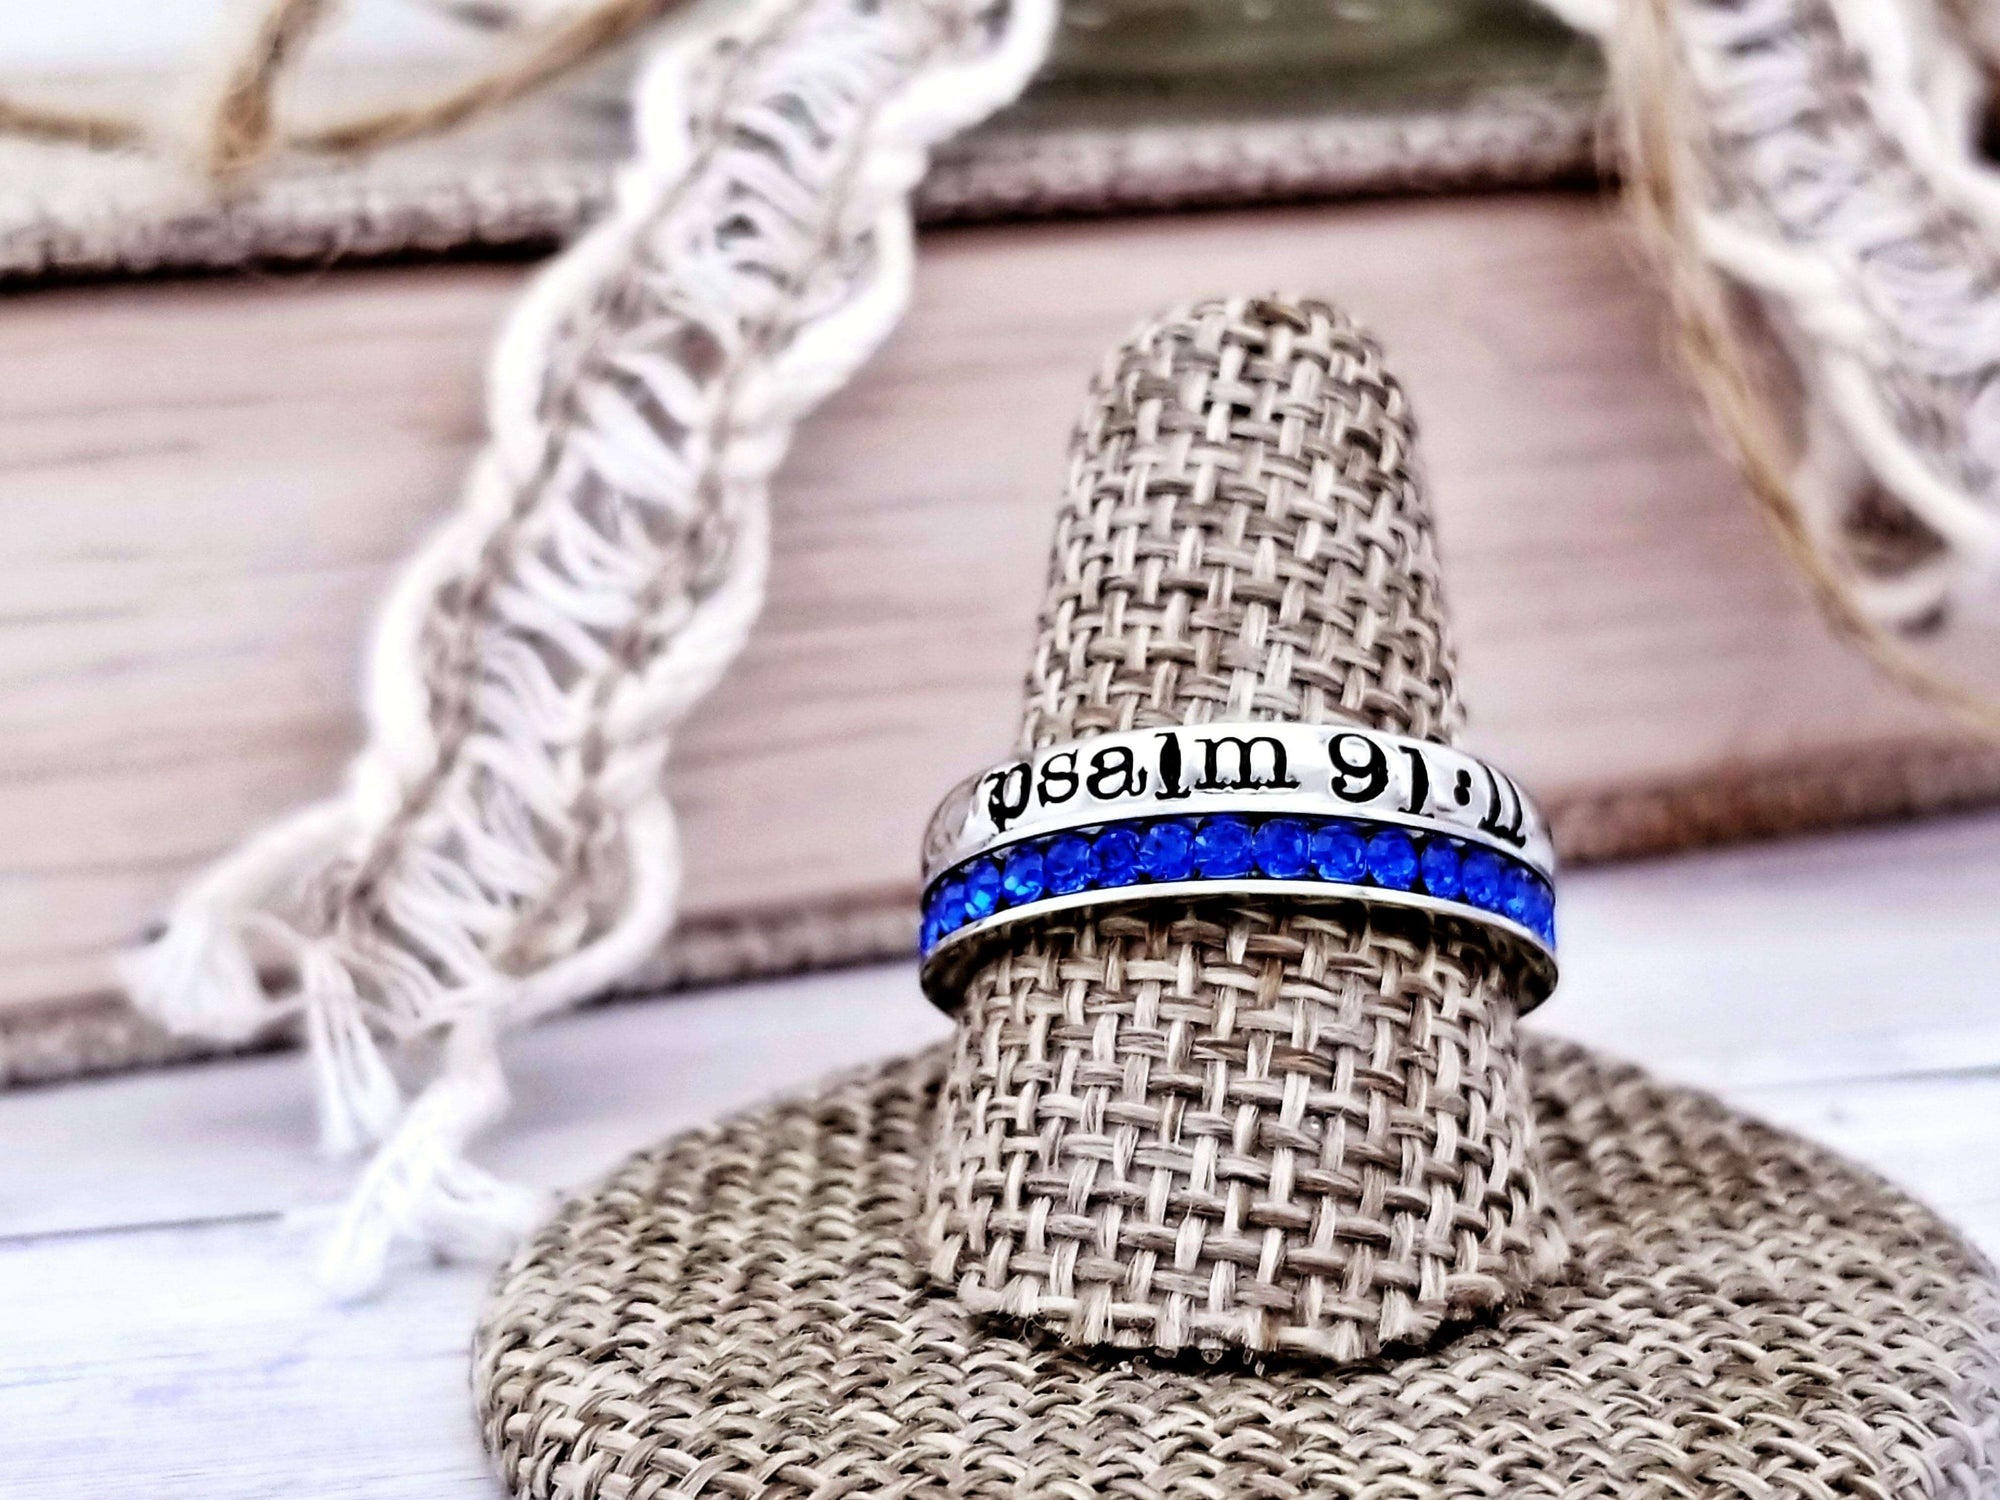 Scripture Ring, Christian Jewelry, Psalm Ring, Scripture Jewelry, Inspirational Ring, Personalize Jewelry, Hand Stamped Ring, Stackable Ring